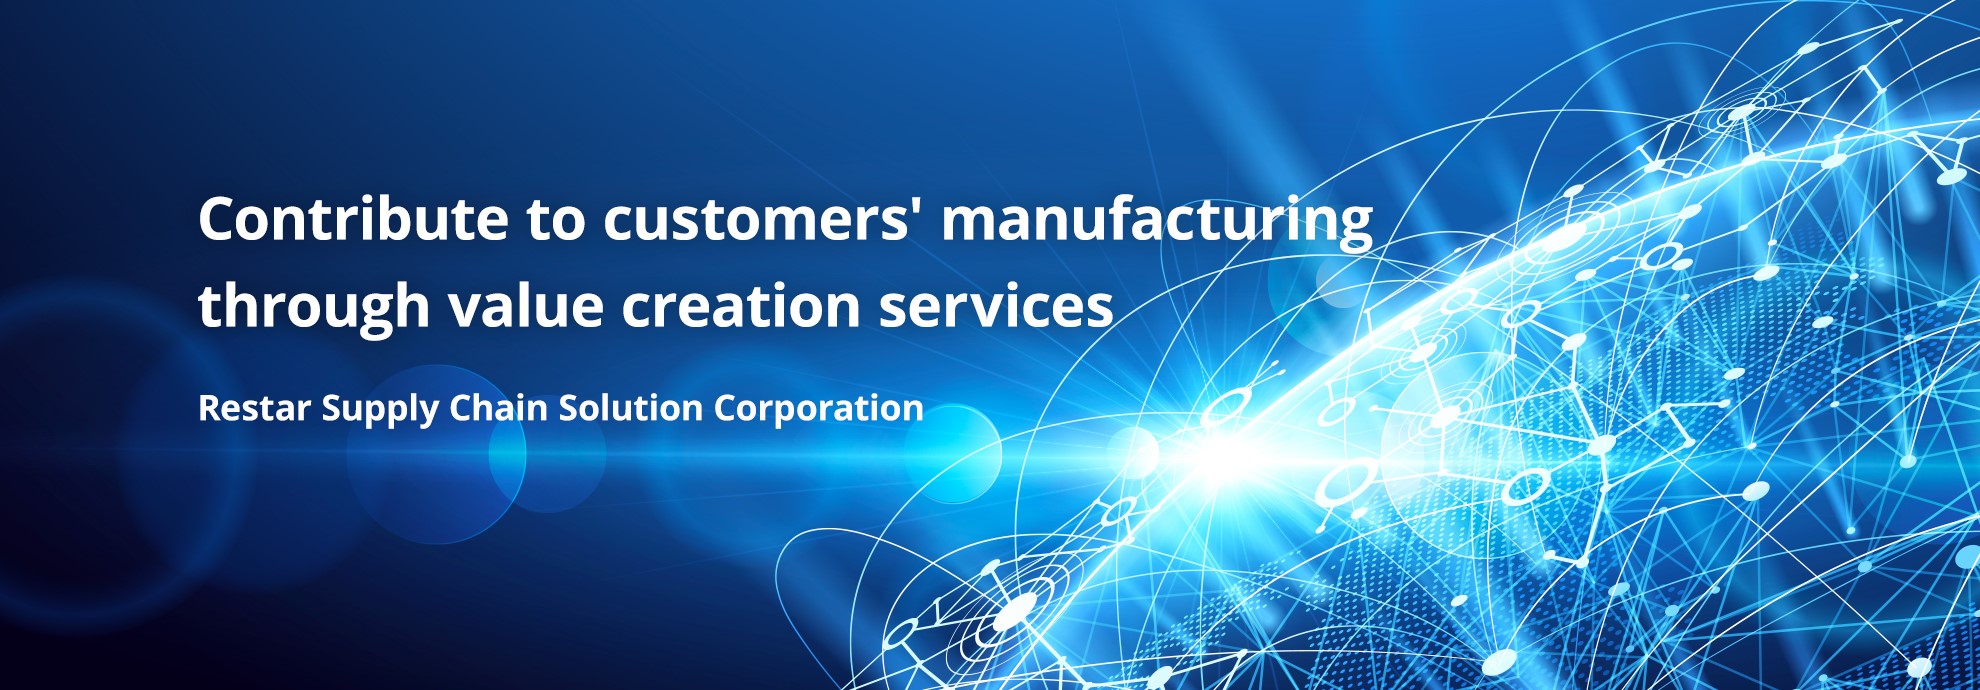 Contribute to customers' manufacturing through value creation services